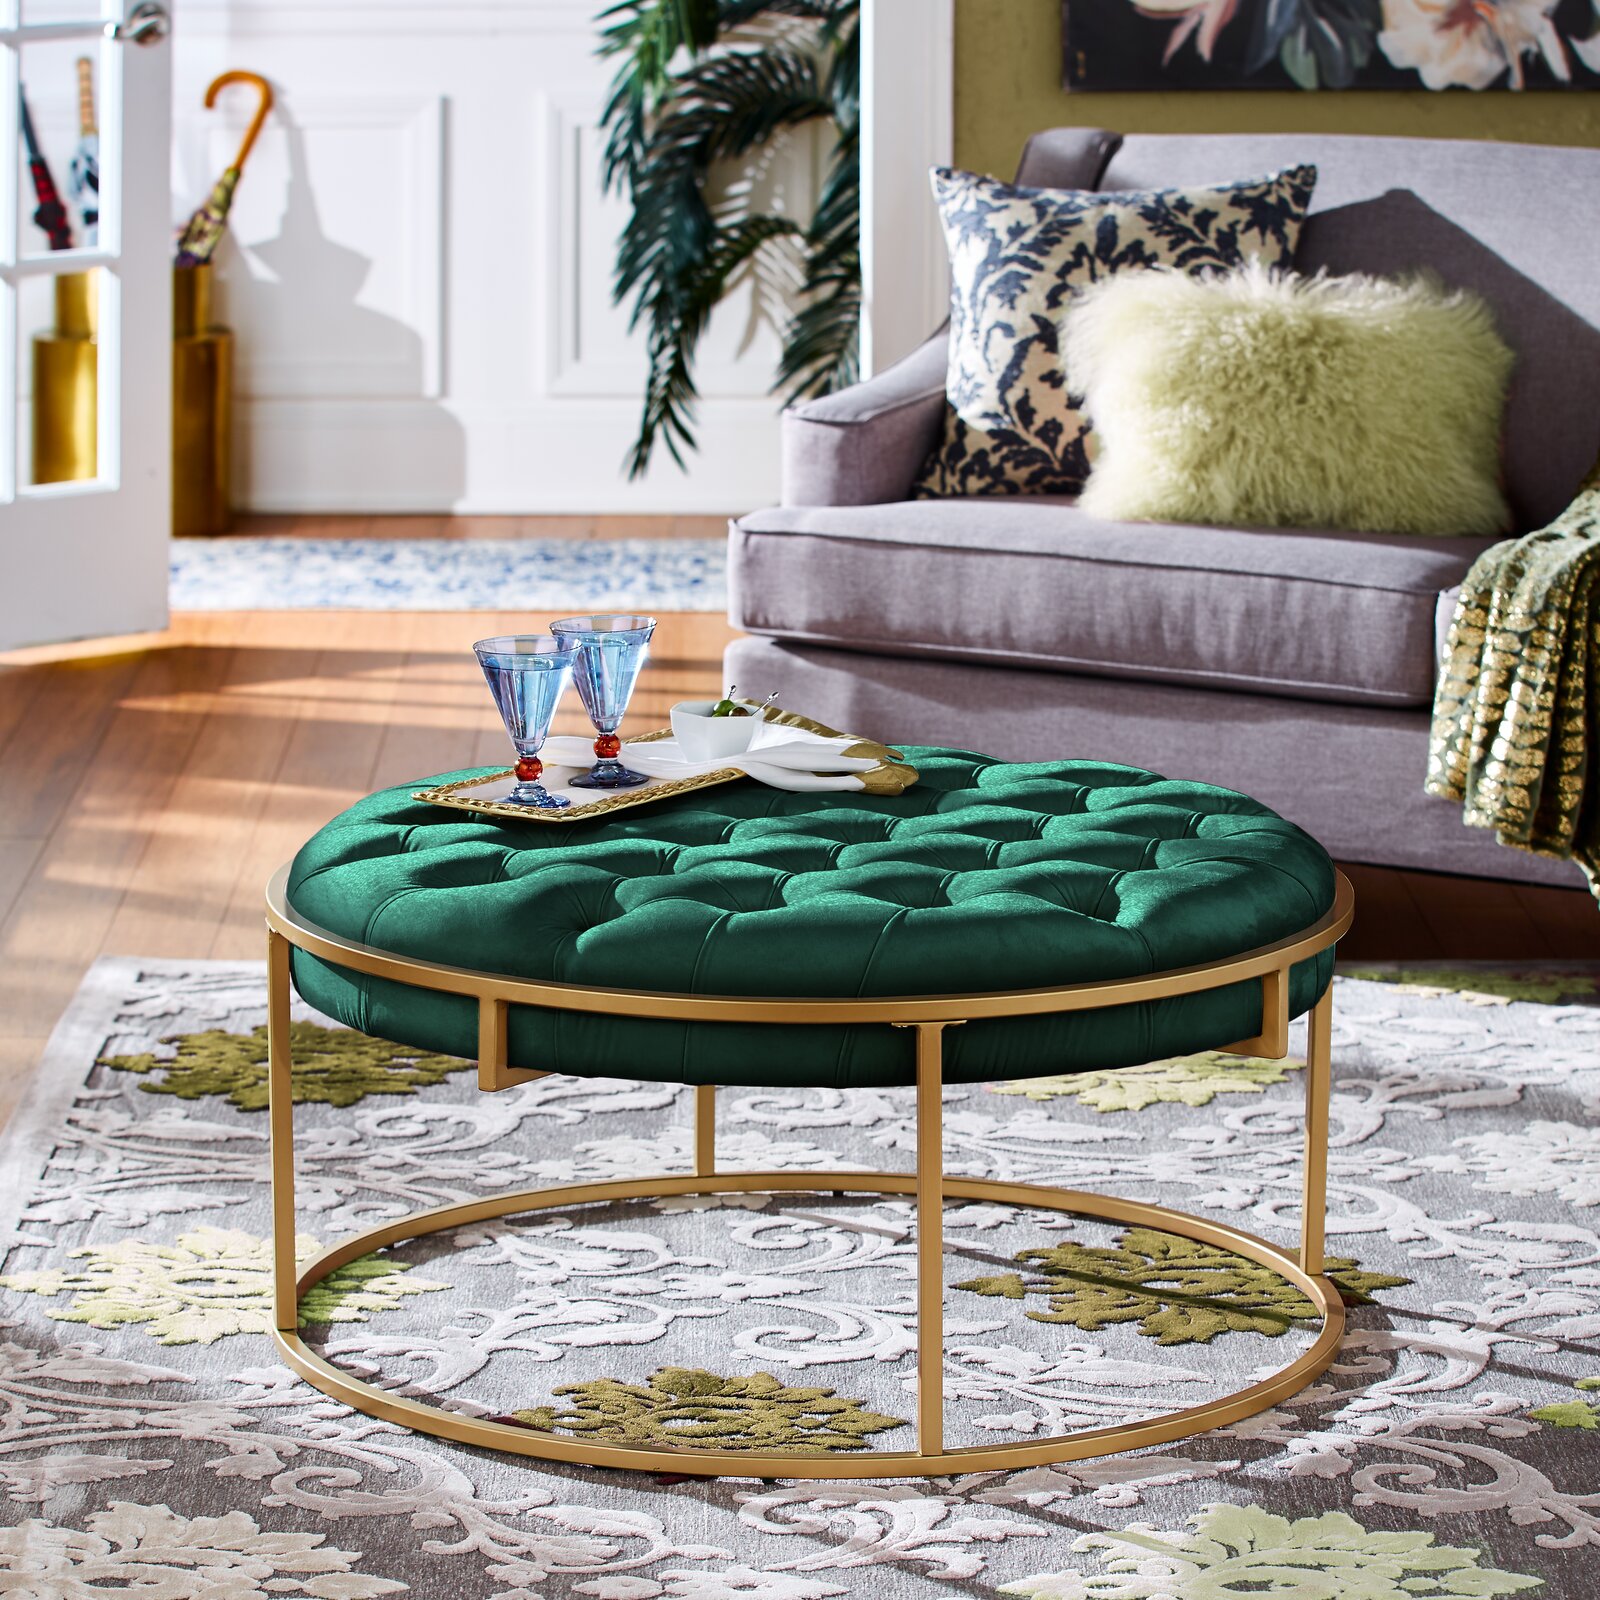 Emerald Green Tufted Ottoman With Gold, Large Round Green Ottoman Coffee Table